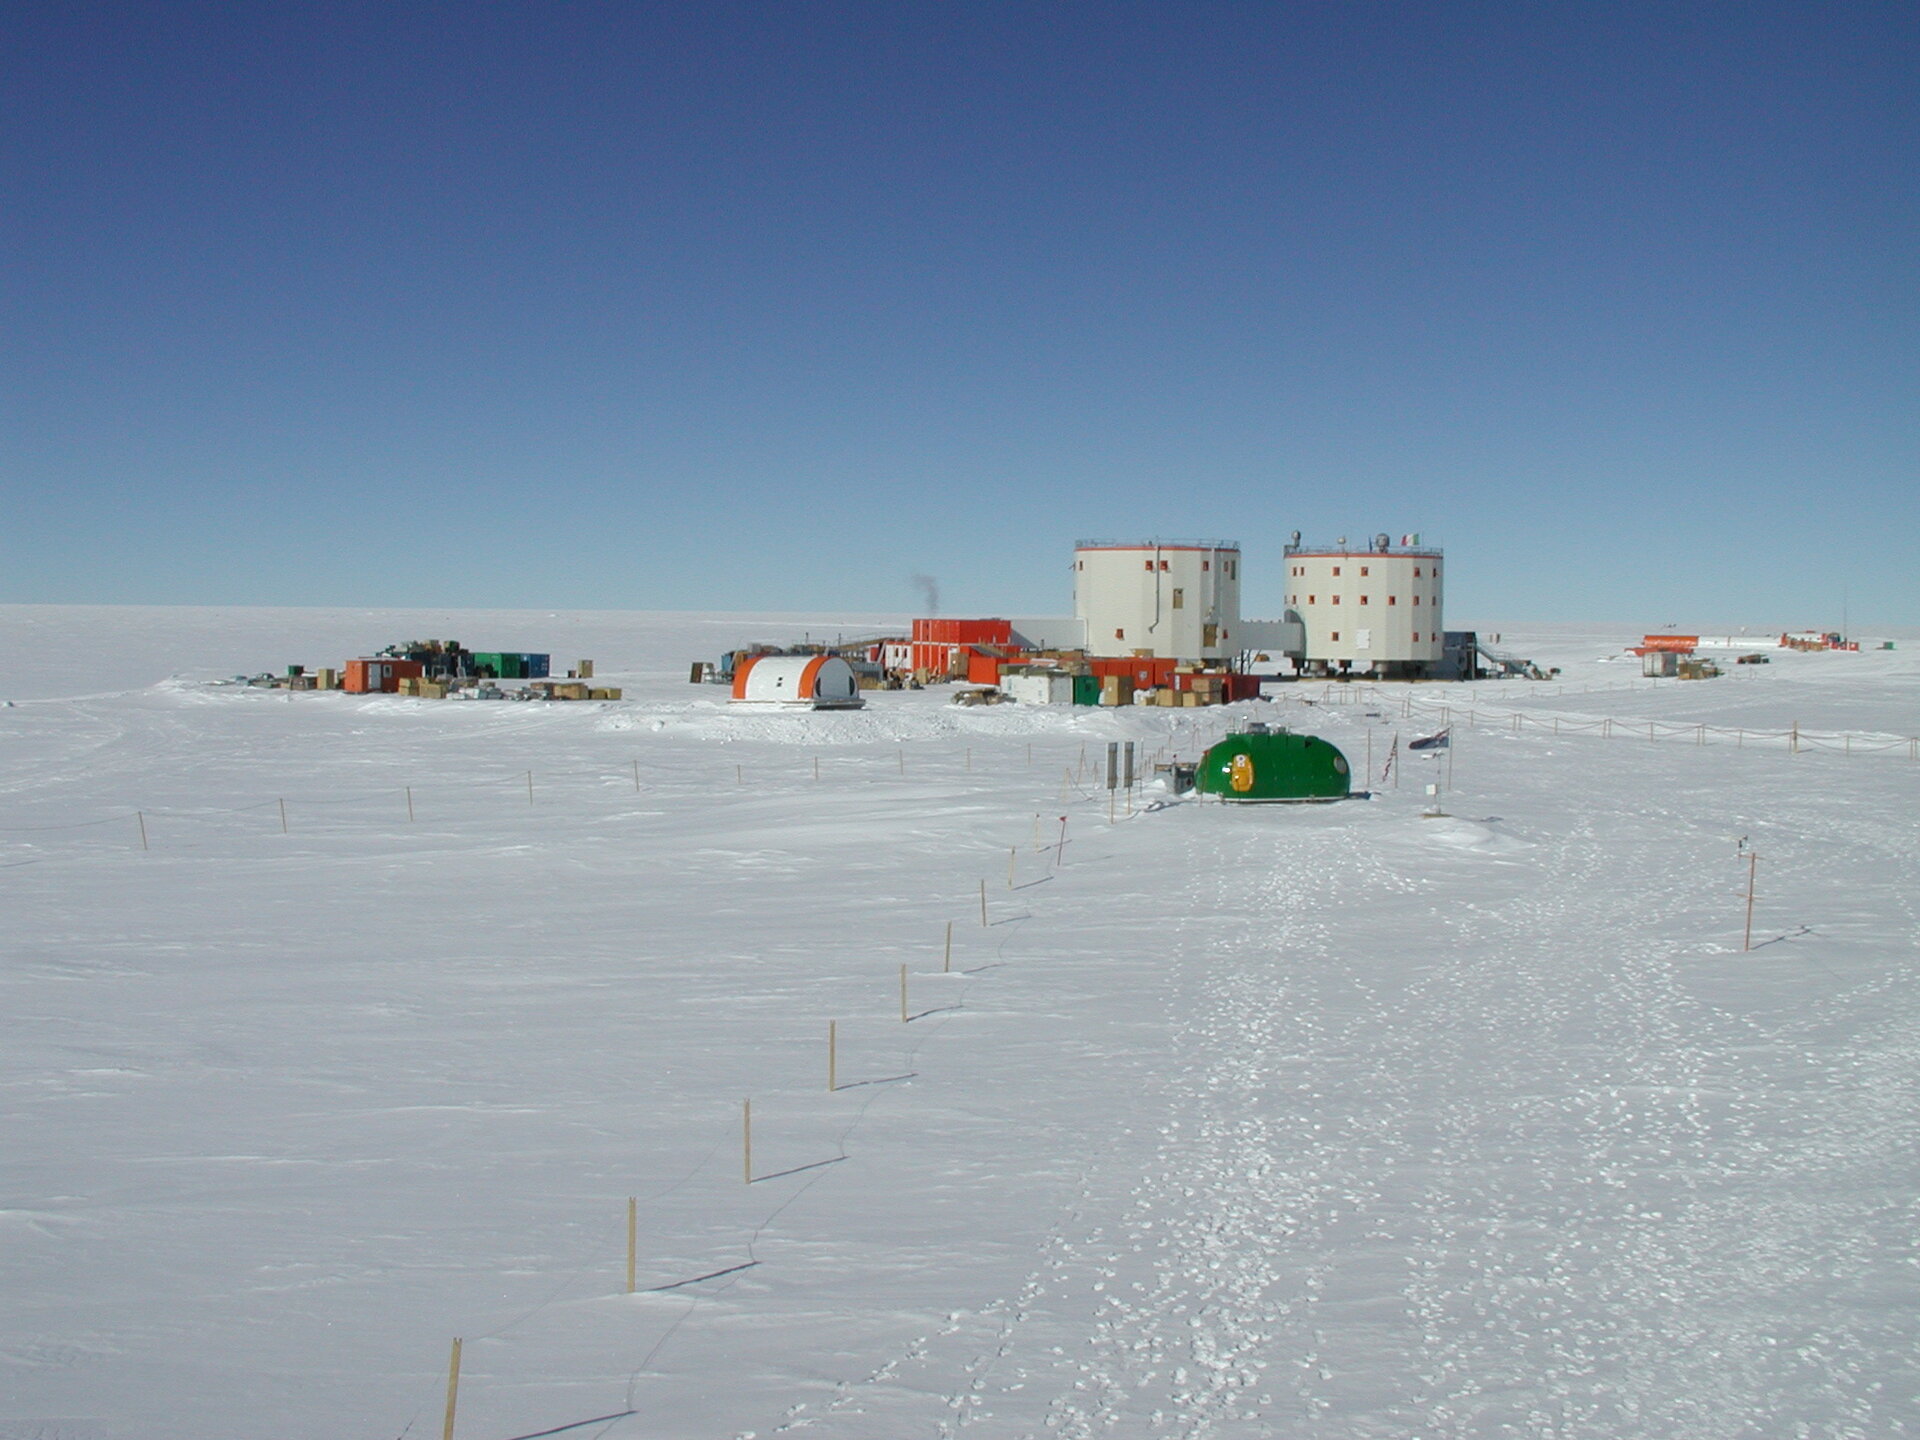 The Antarctic station Concordia is located in one of the most hostile environments on the Earth